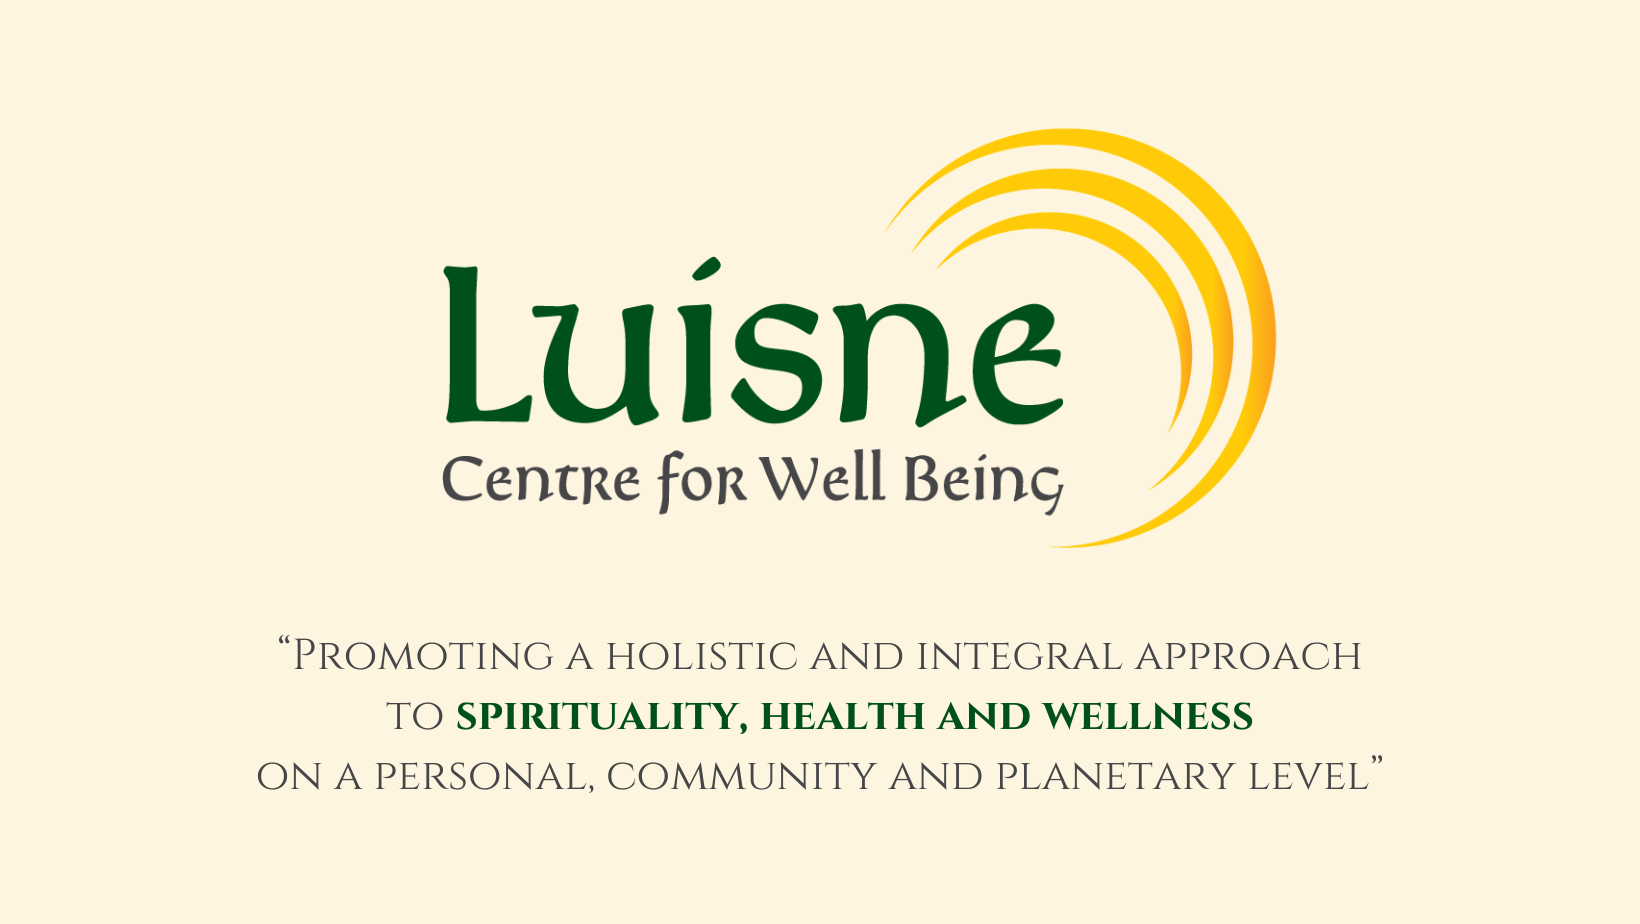 Promoting a holistic and integral approach to spirituality, health and wellness on a personal, community and planetary level        